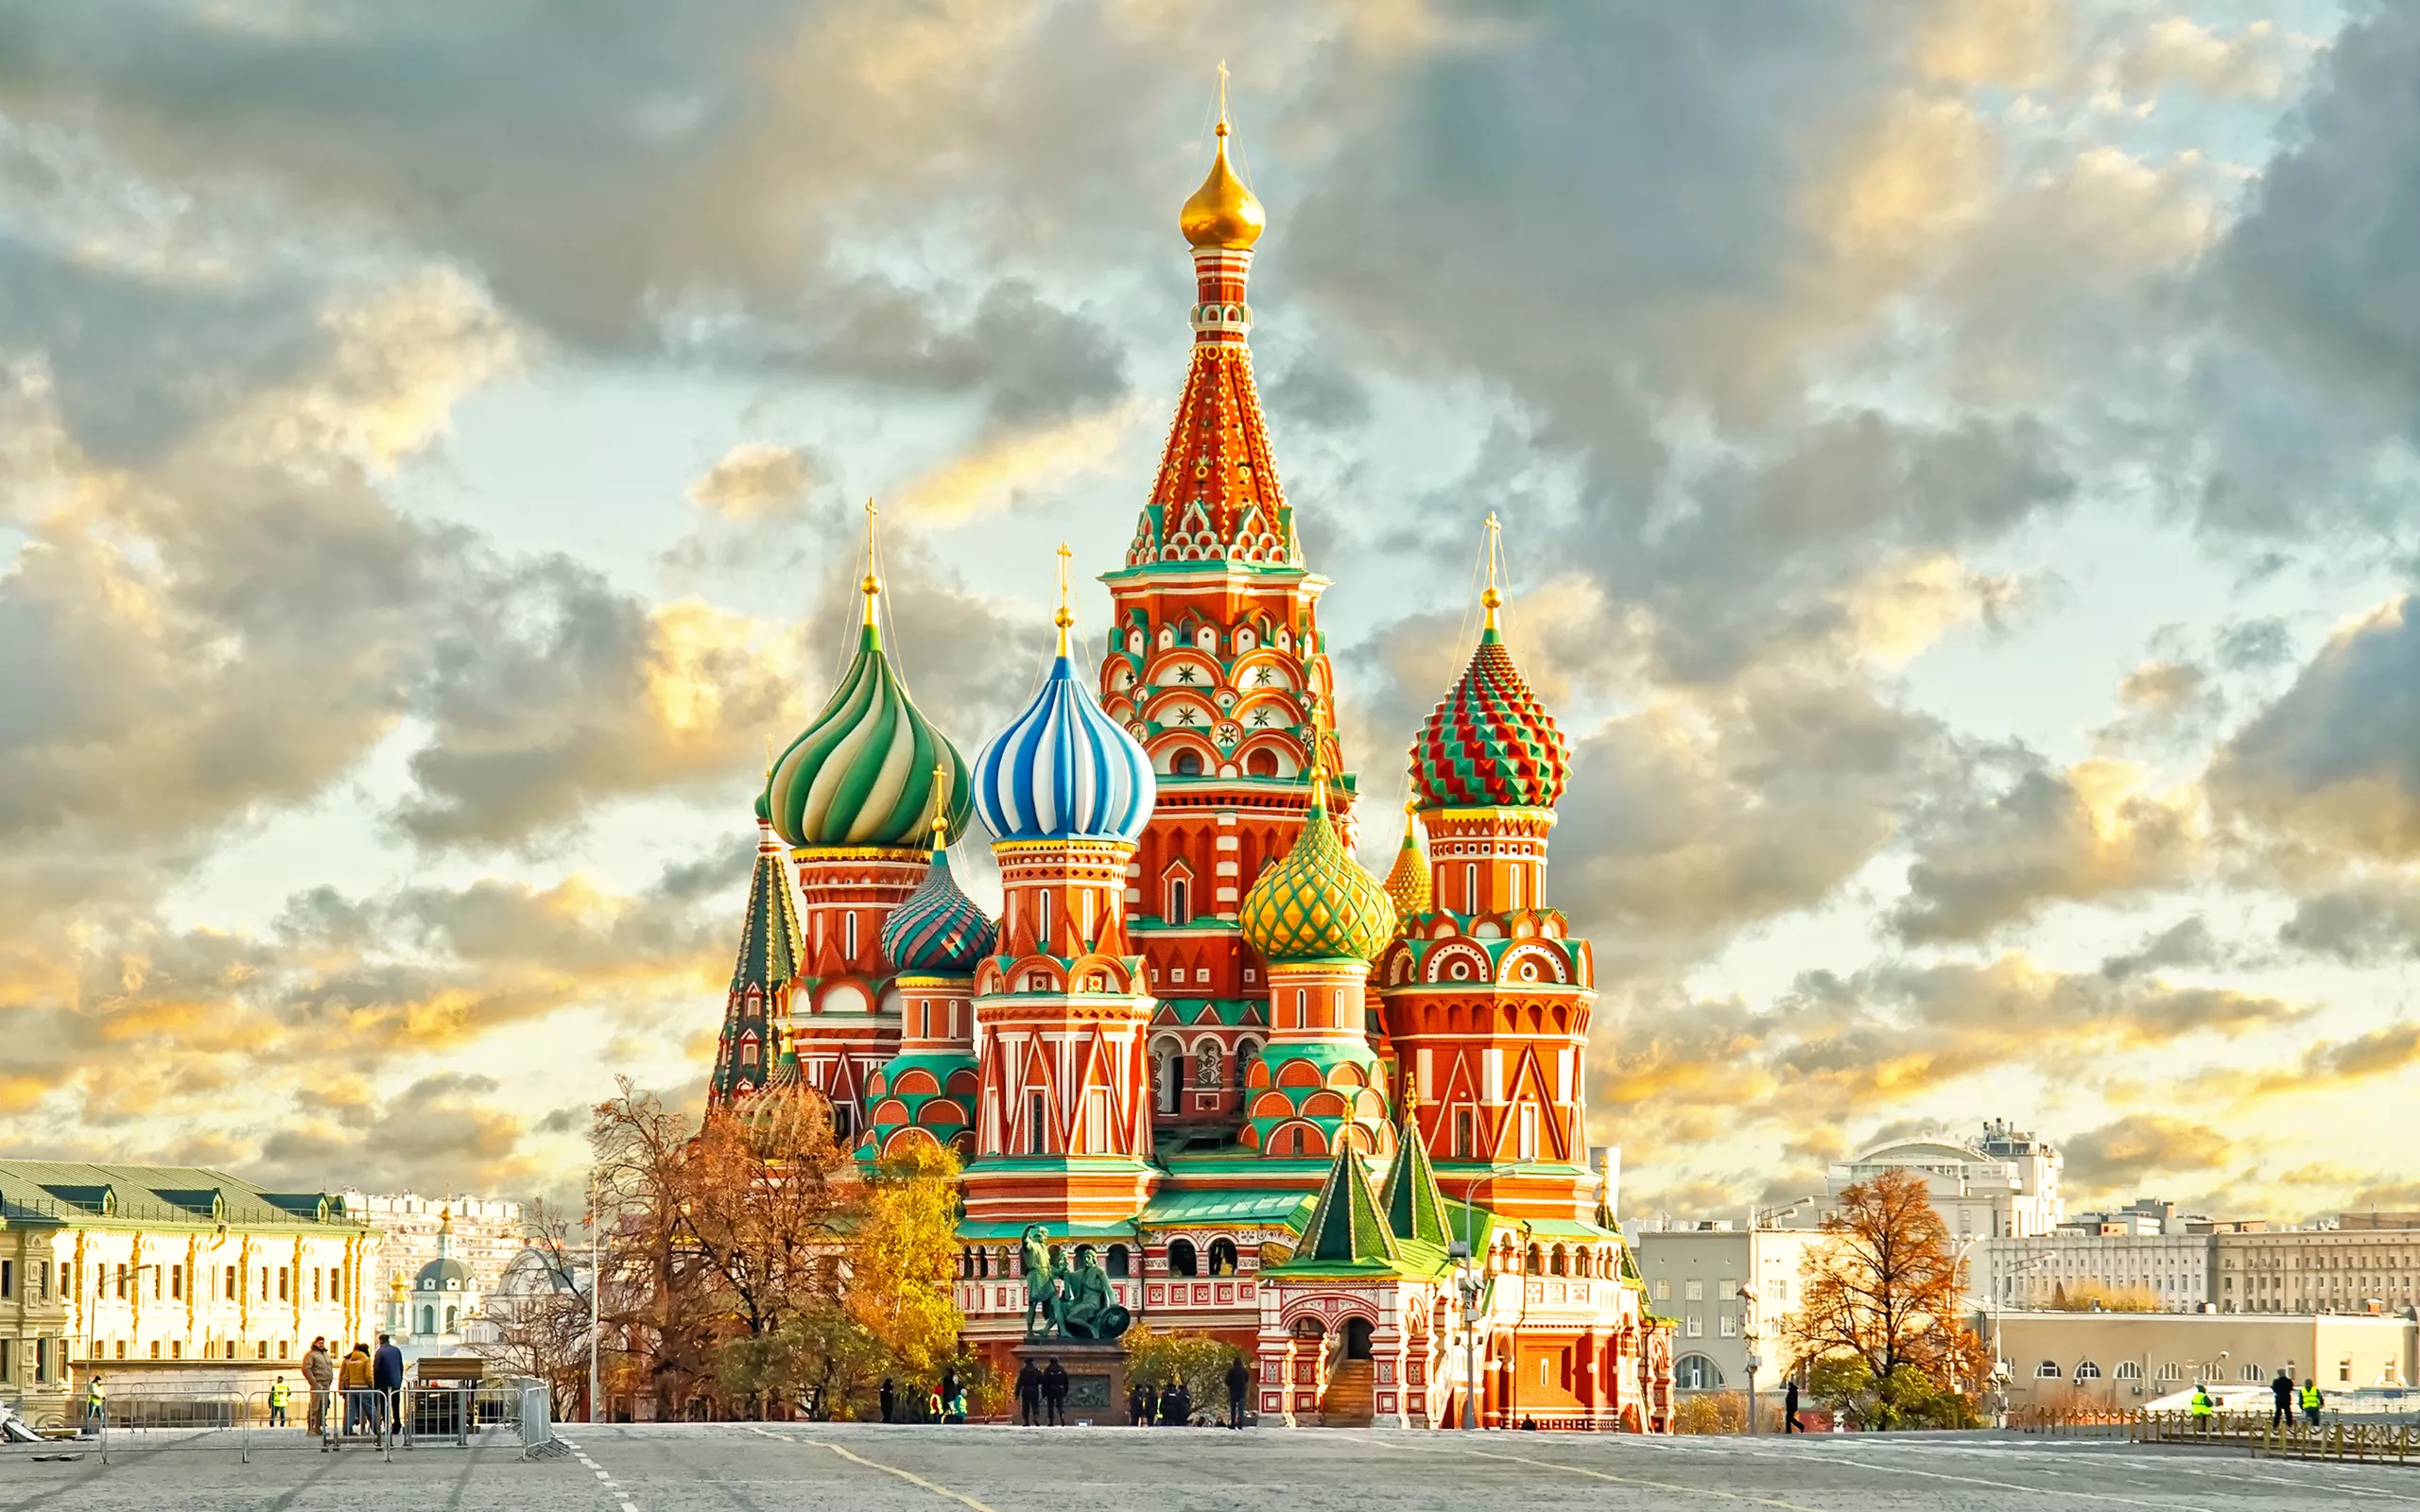 St. Basil's Cathedral in Russia, Europe | Architecture - Rated 4.1